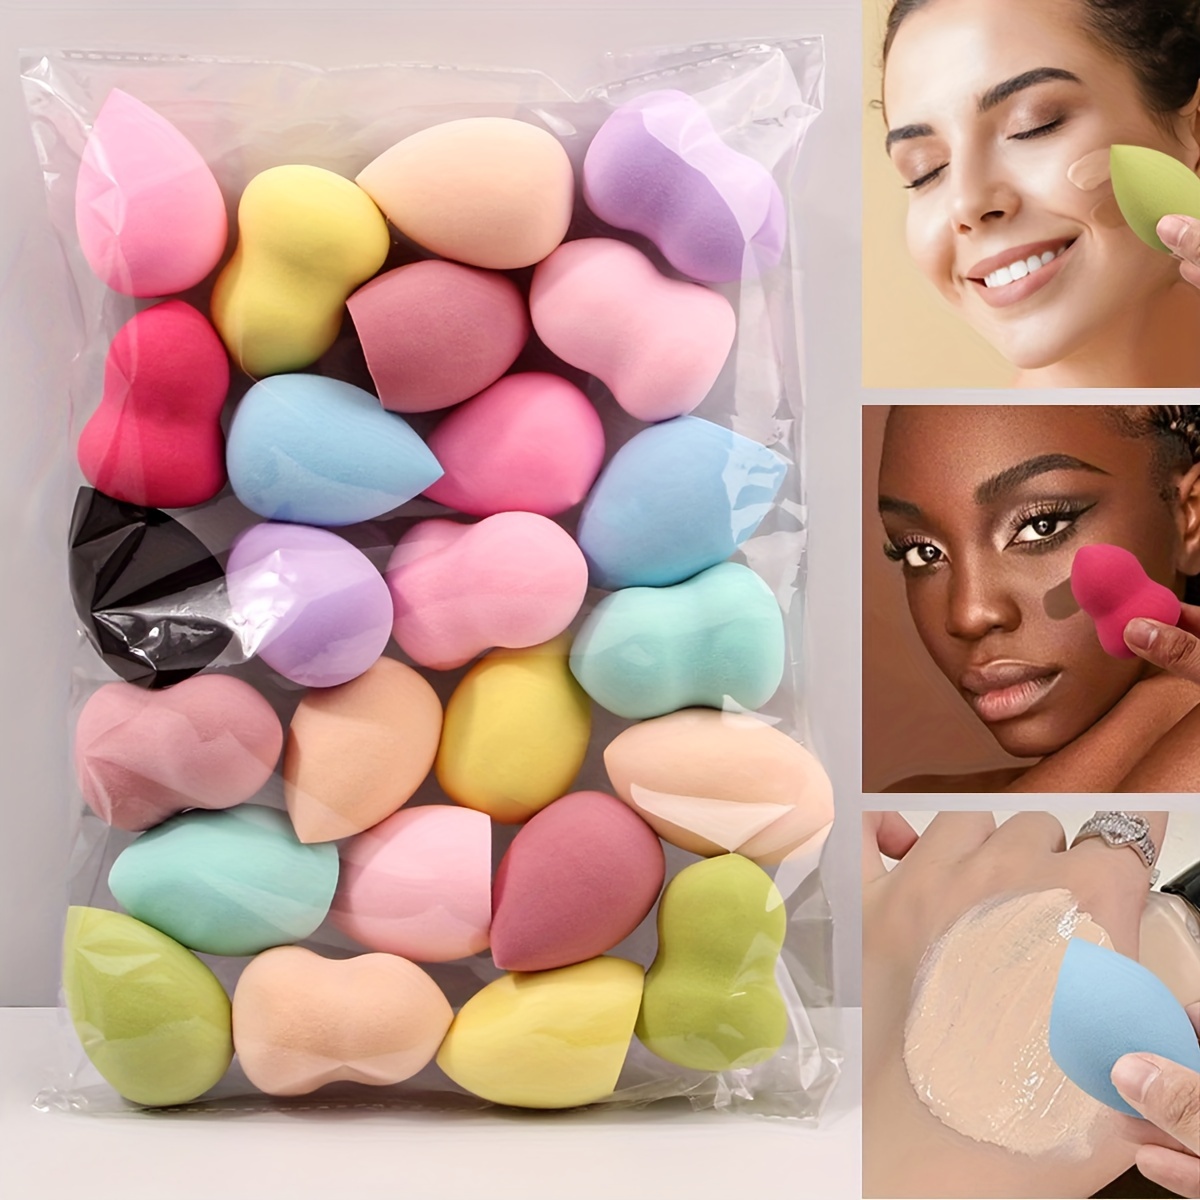 

10pcs Super Soft Makeup Sponges, Beauty Blenders, Non-absorbent Cosmetic Puff Set For Foundation, Powder, And Cream Application